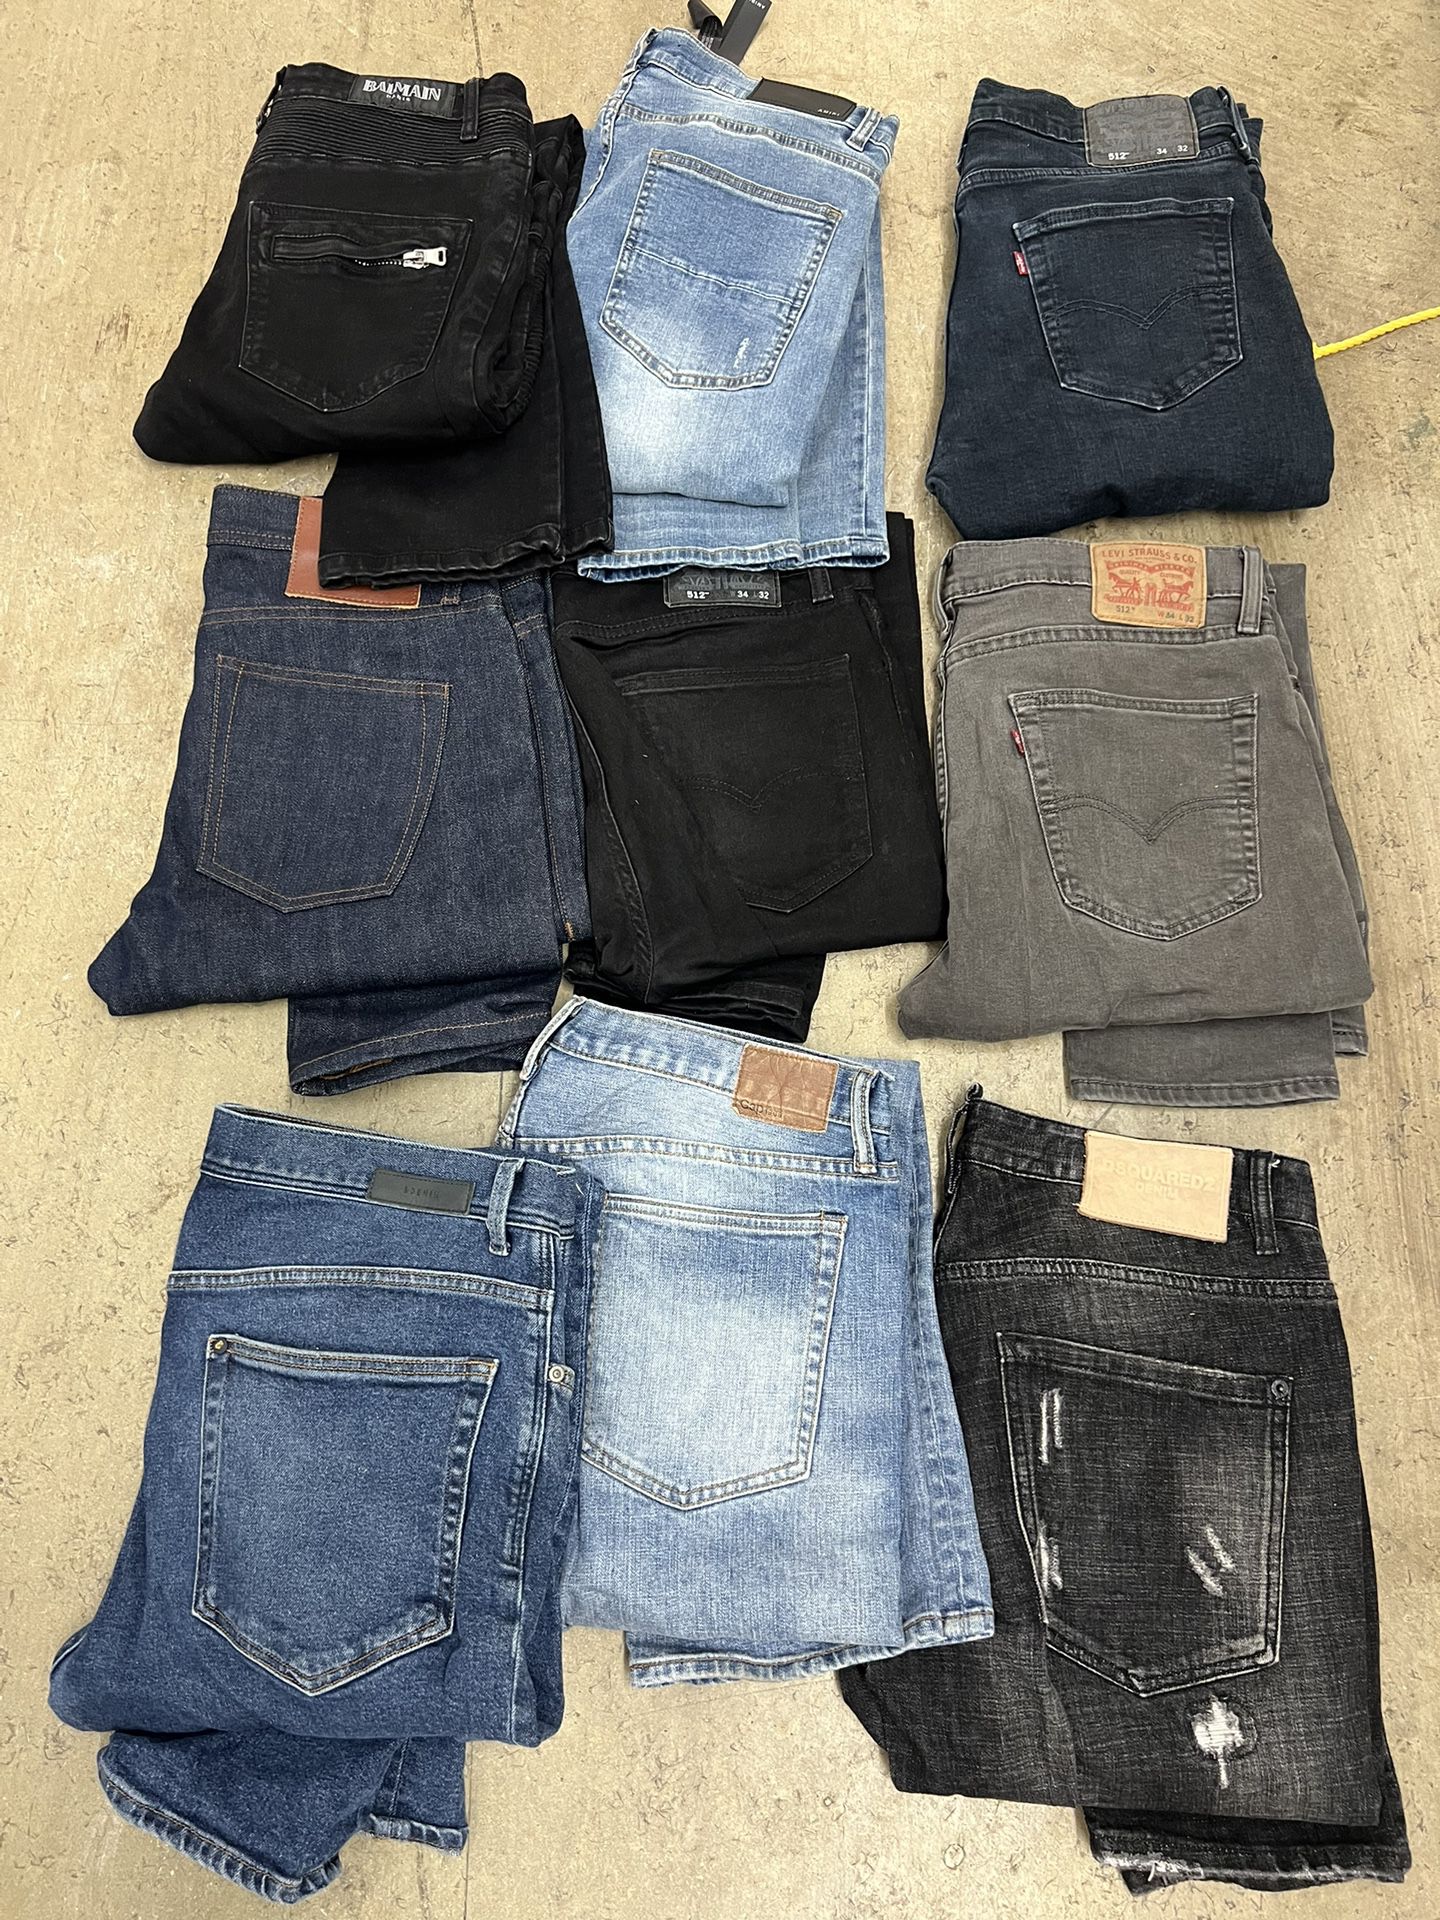 Levis, Balmain, Dsquared, And More Jeans 